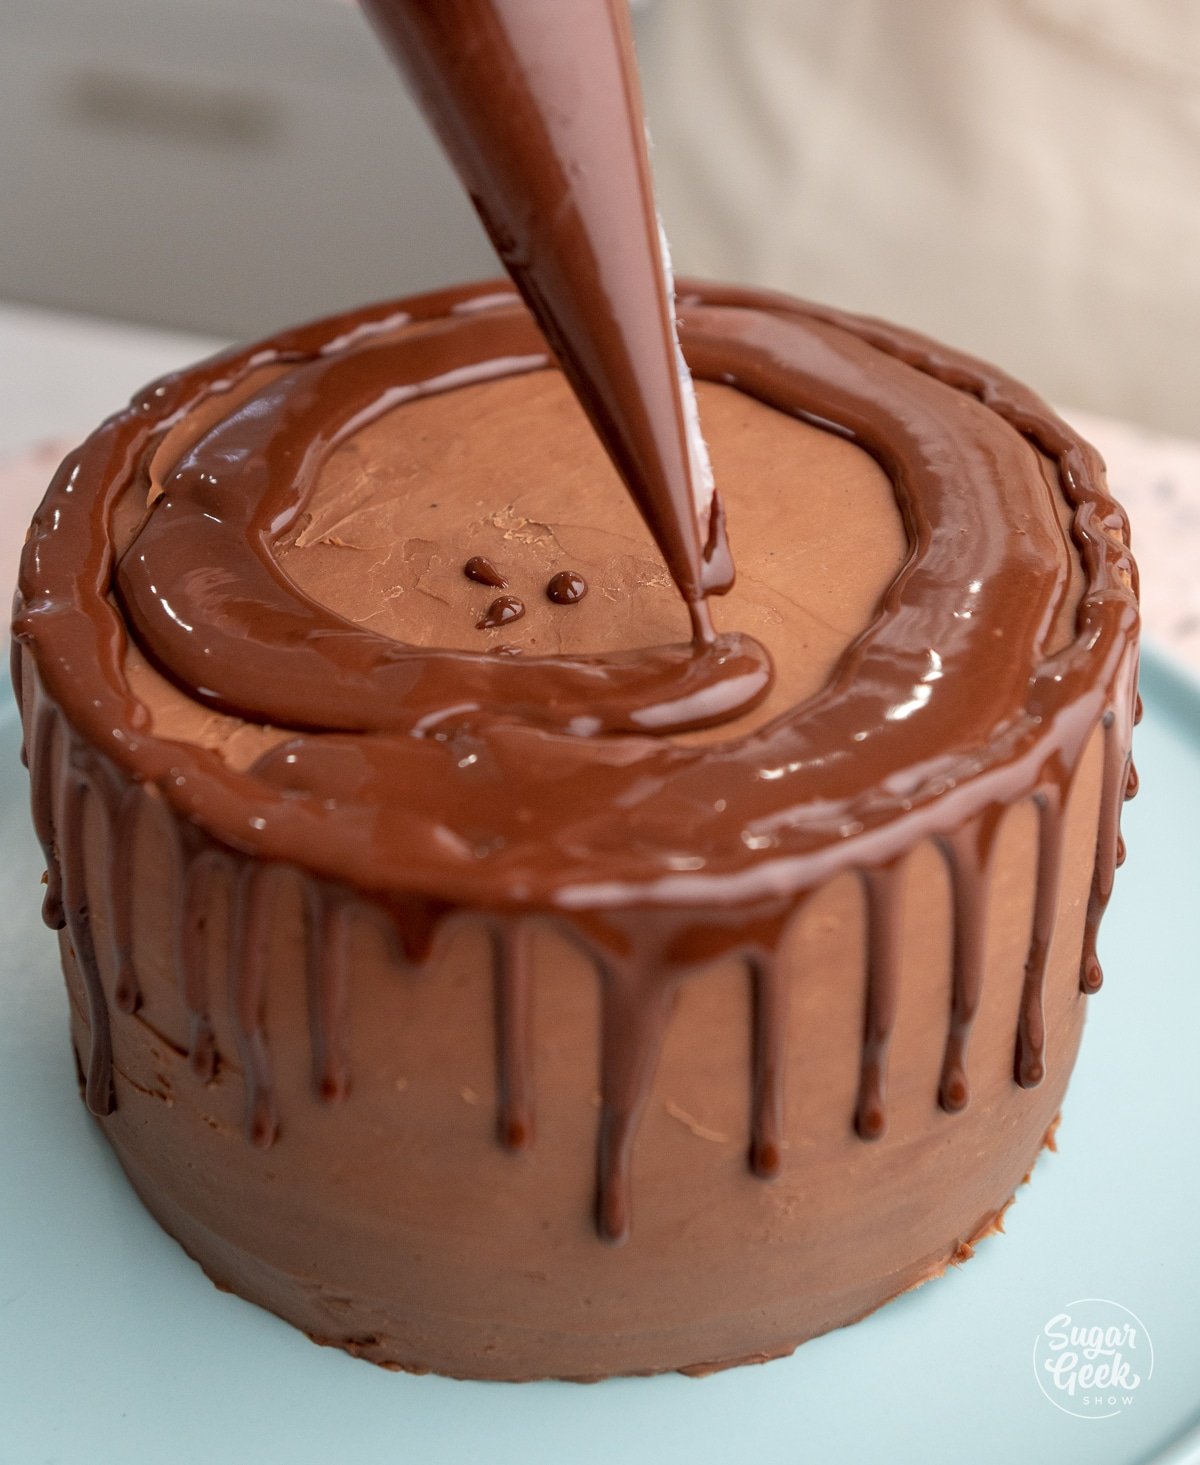 piping bag of ganache creating a drip on the sides and top of a cake